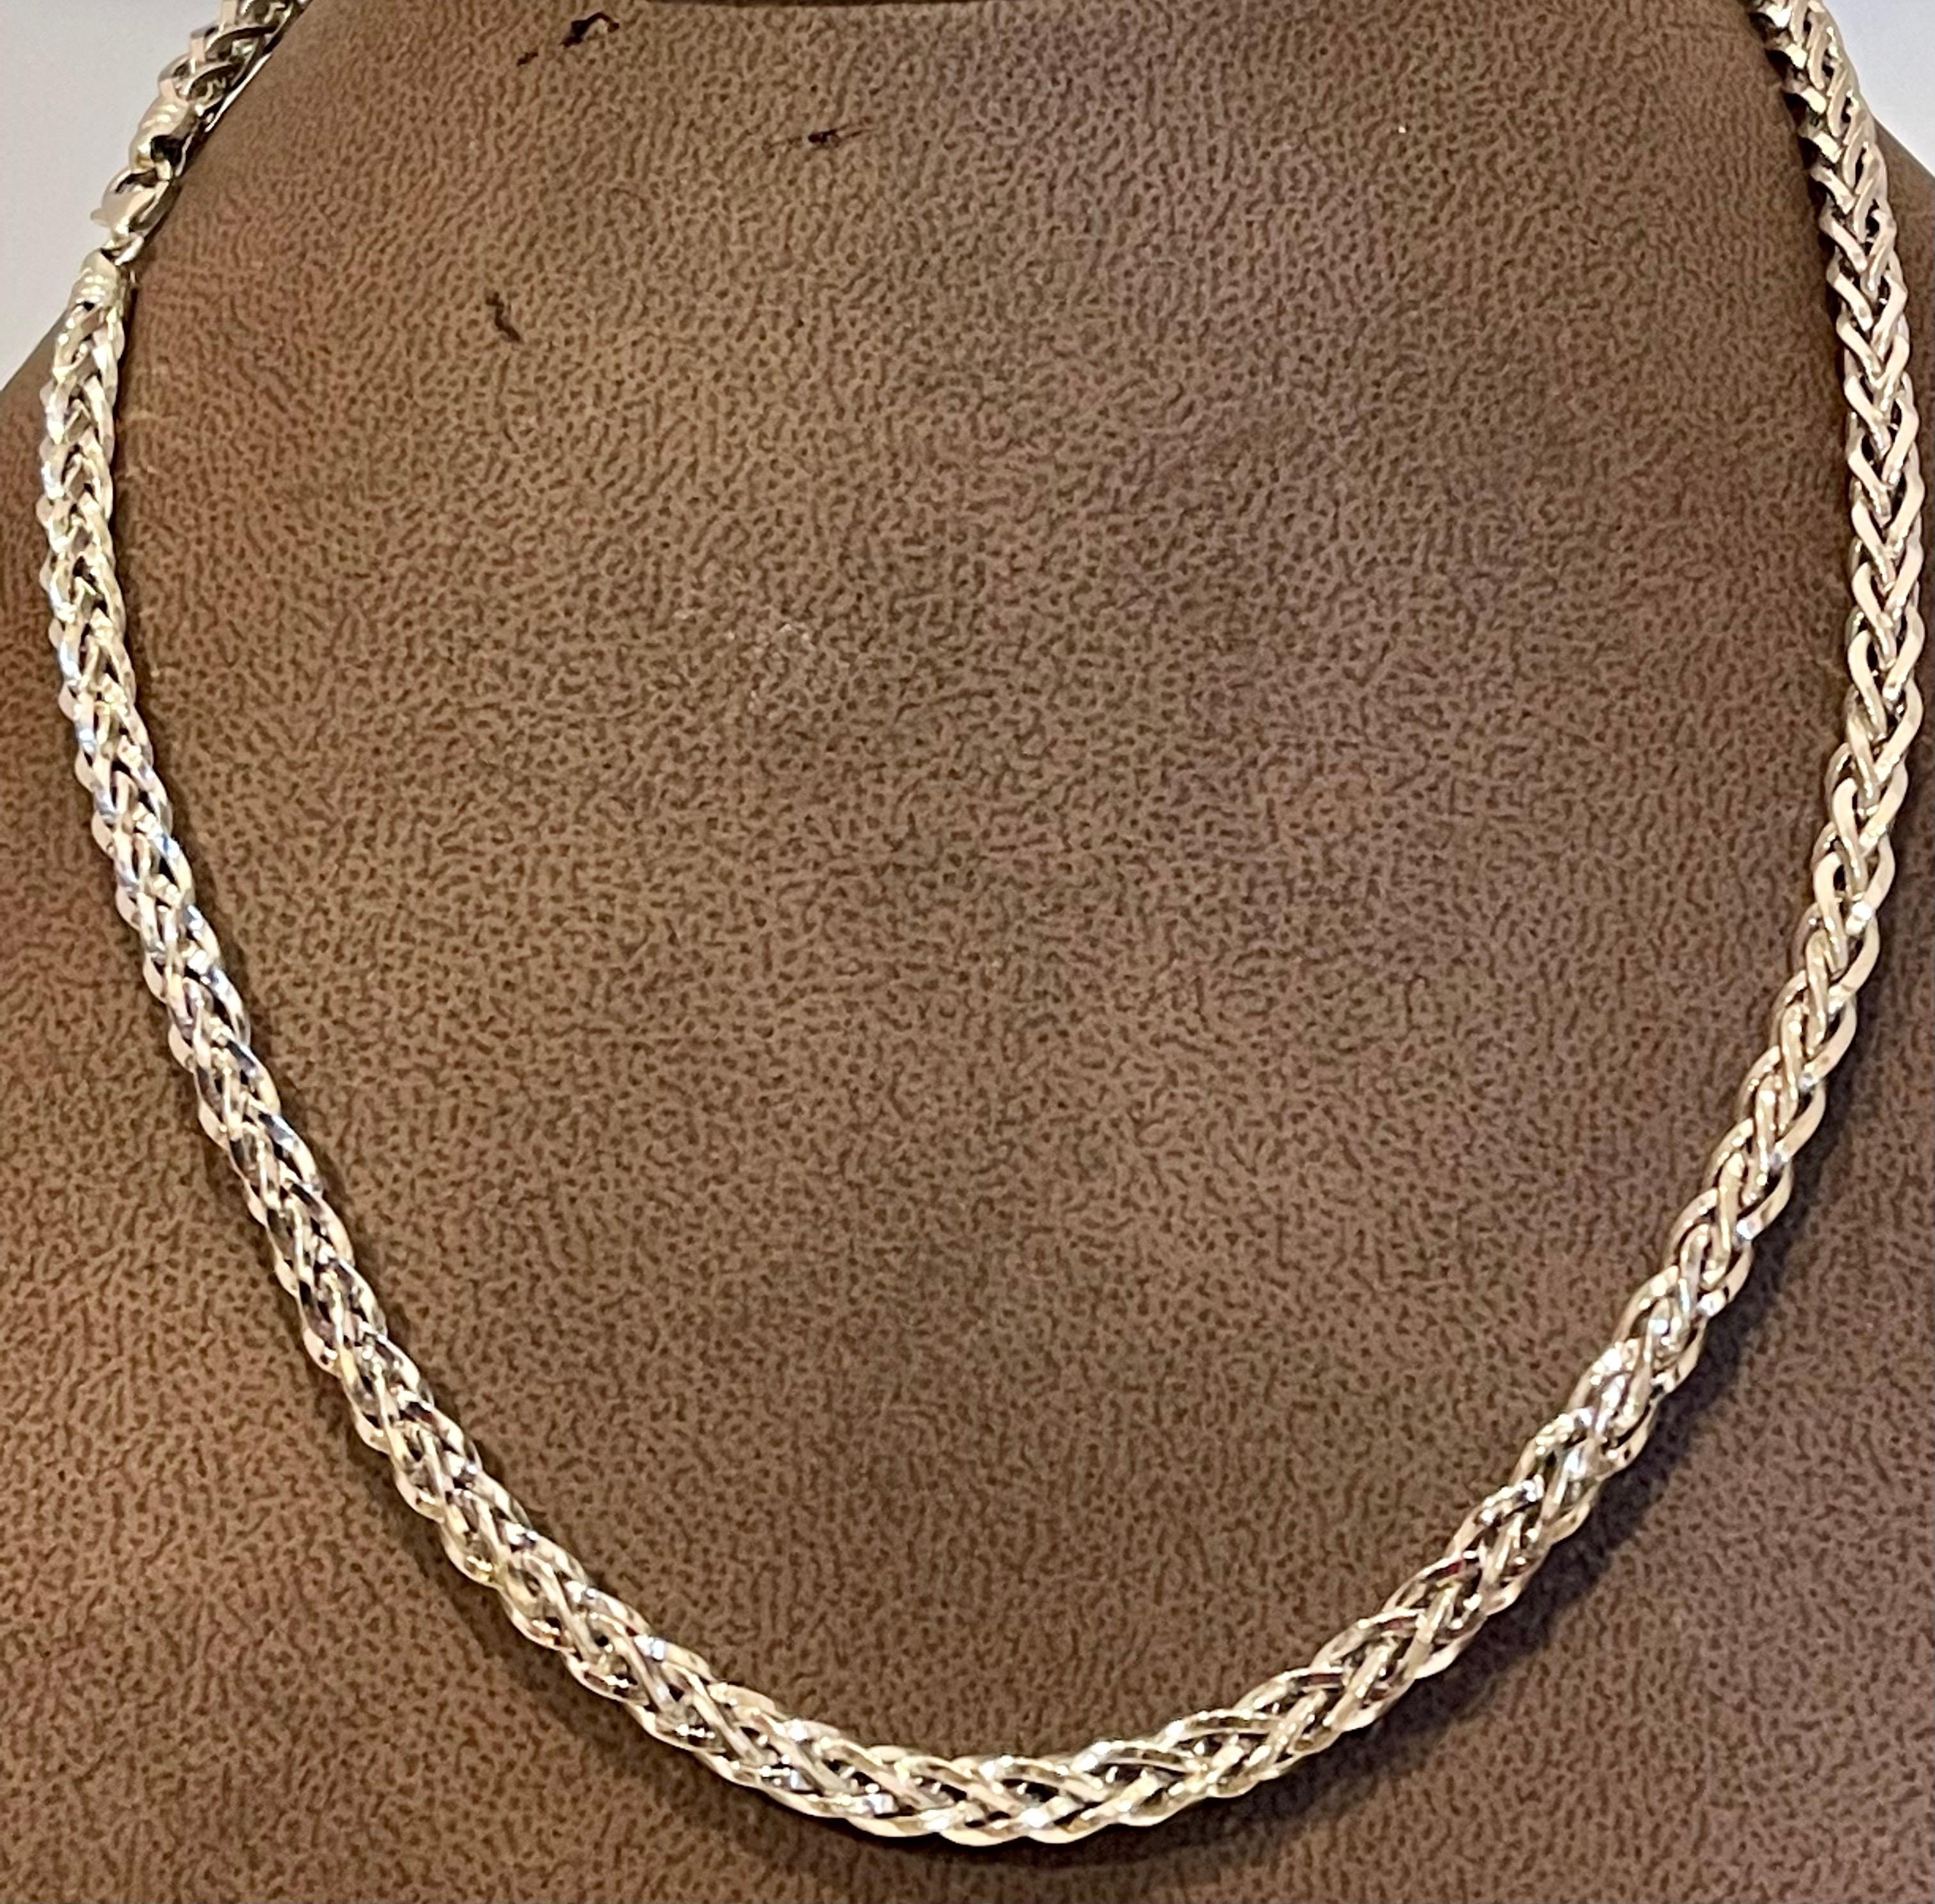 Vintage Unisex 14kt White Gold 18 in Hollow Wheat Chain, Italian, 11 Gm For Sale 1